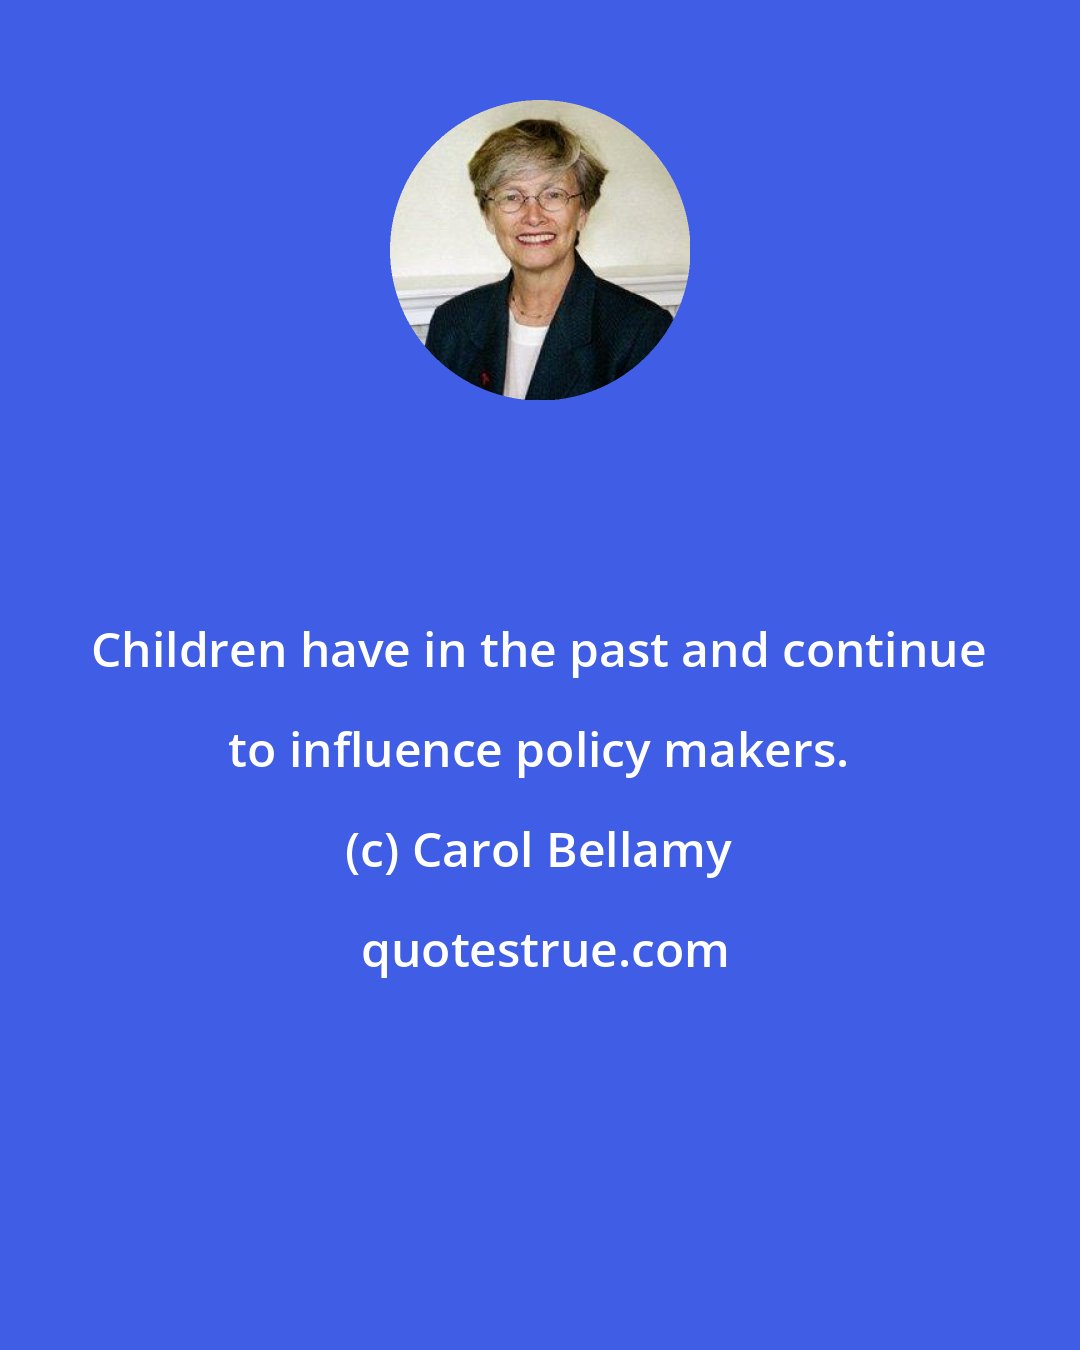 Carol Bellamy: Children have in the past and continue to influence policy makers.